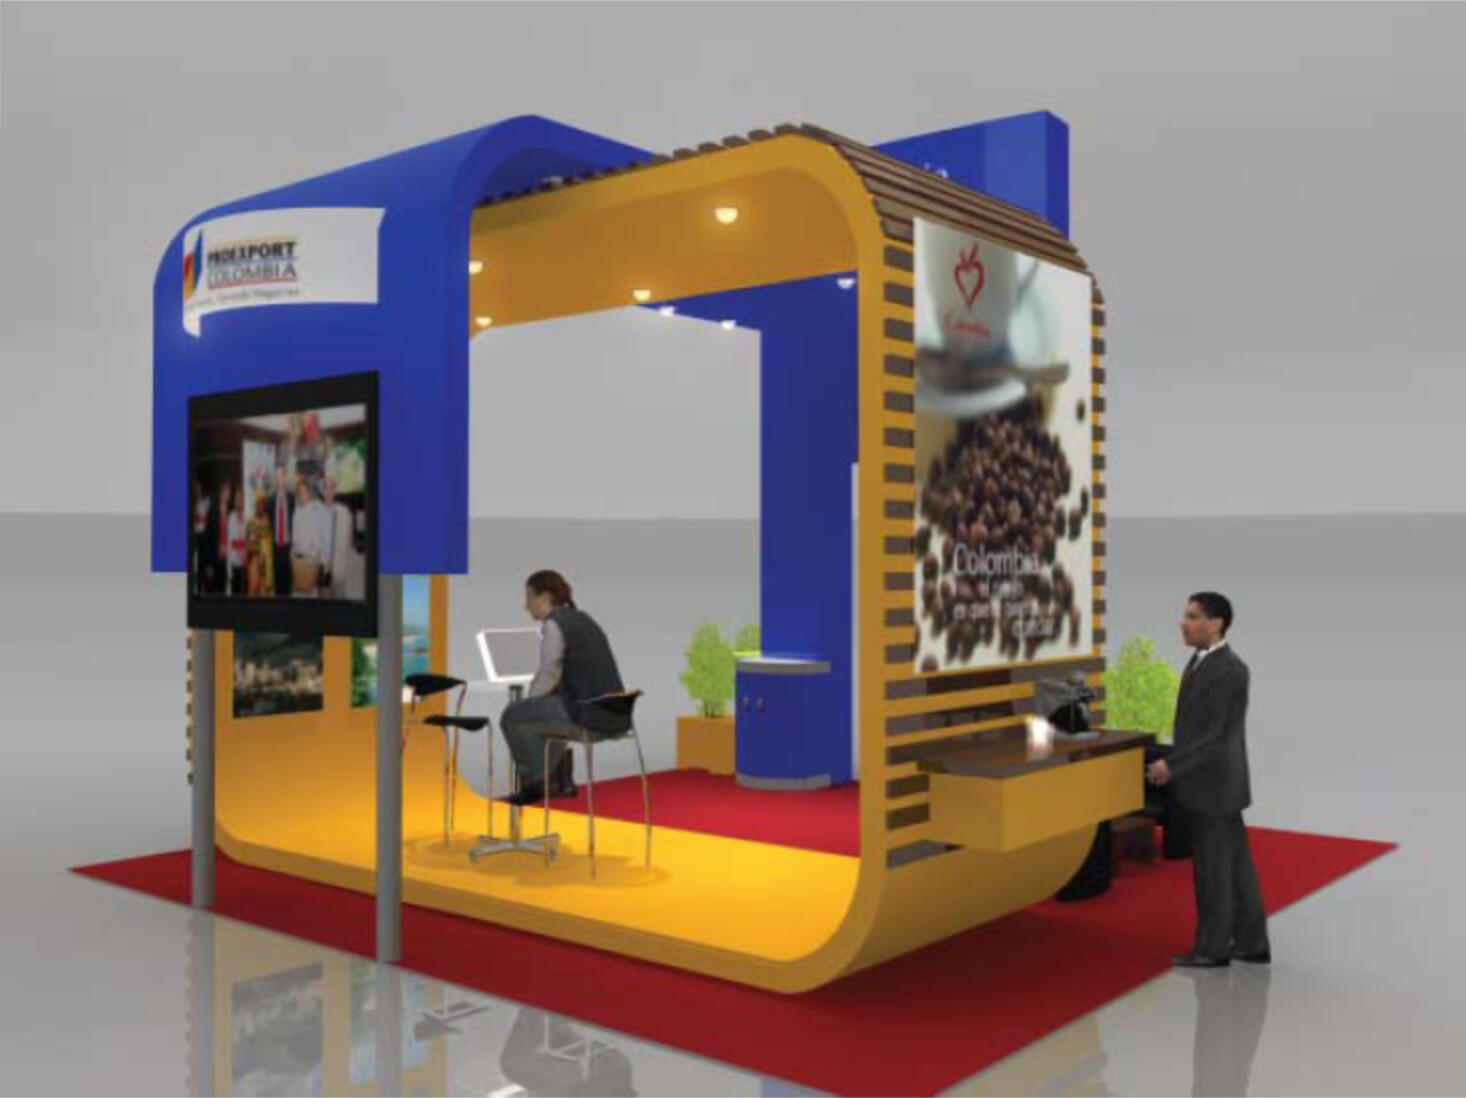 Stand Proexport Colombia